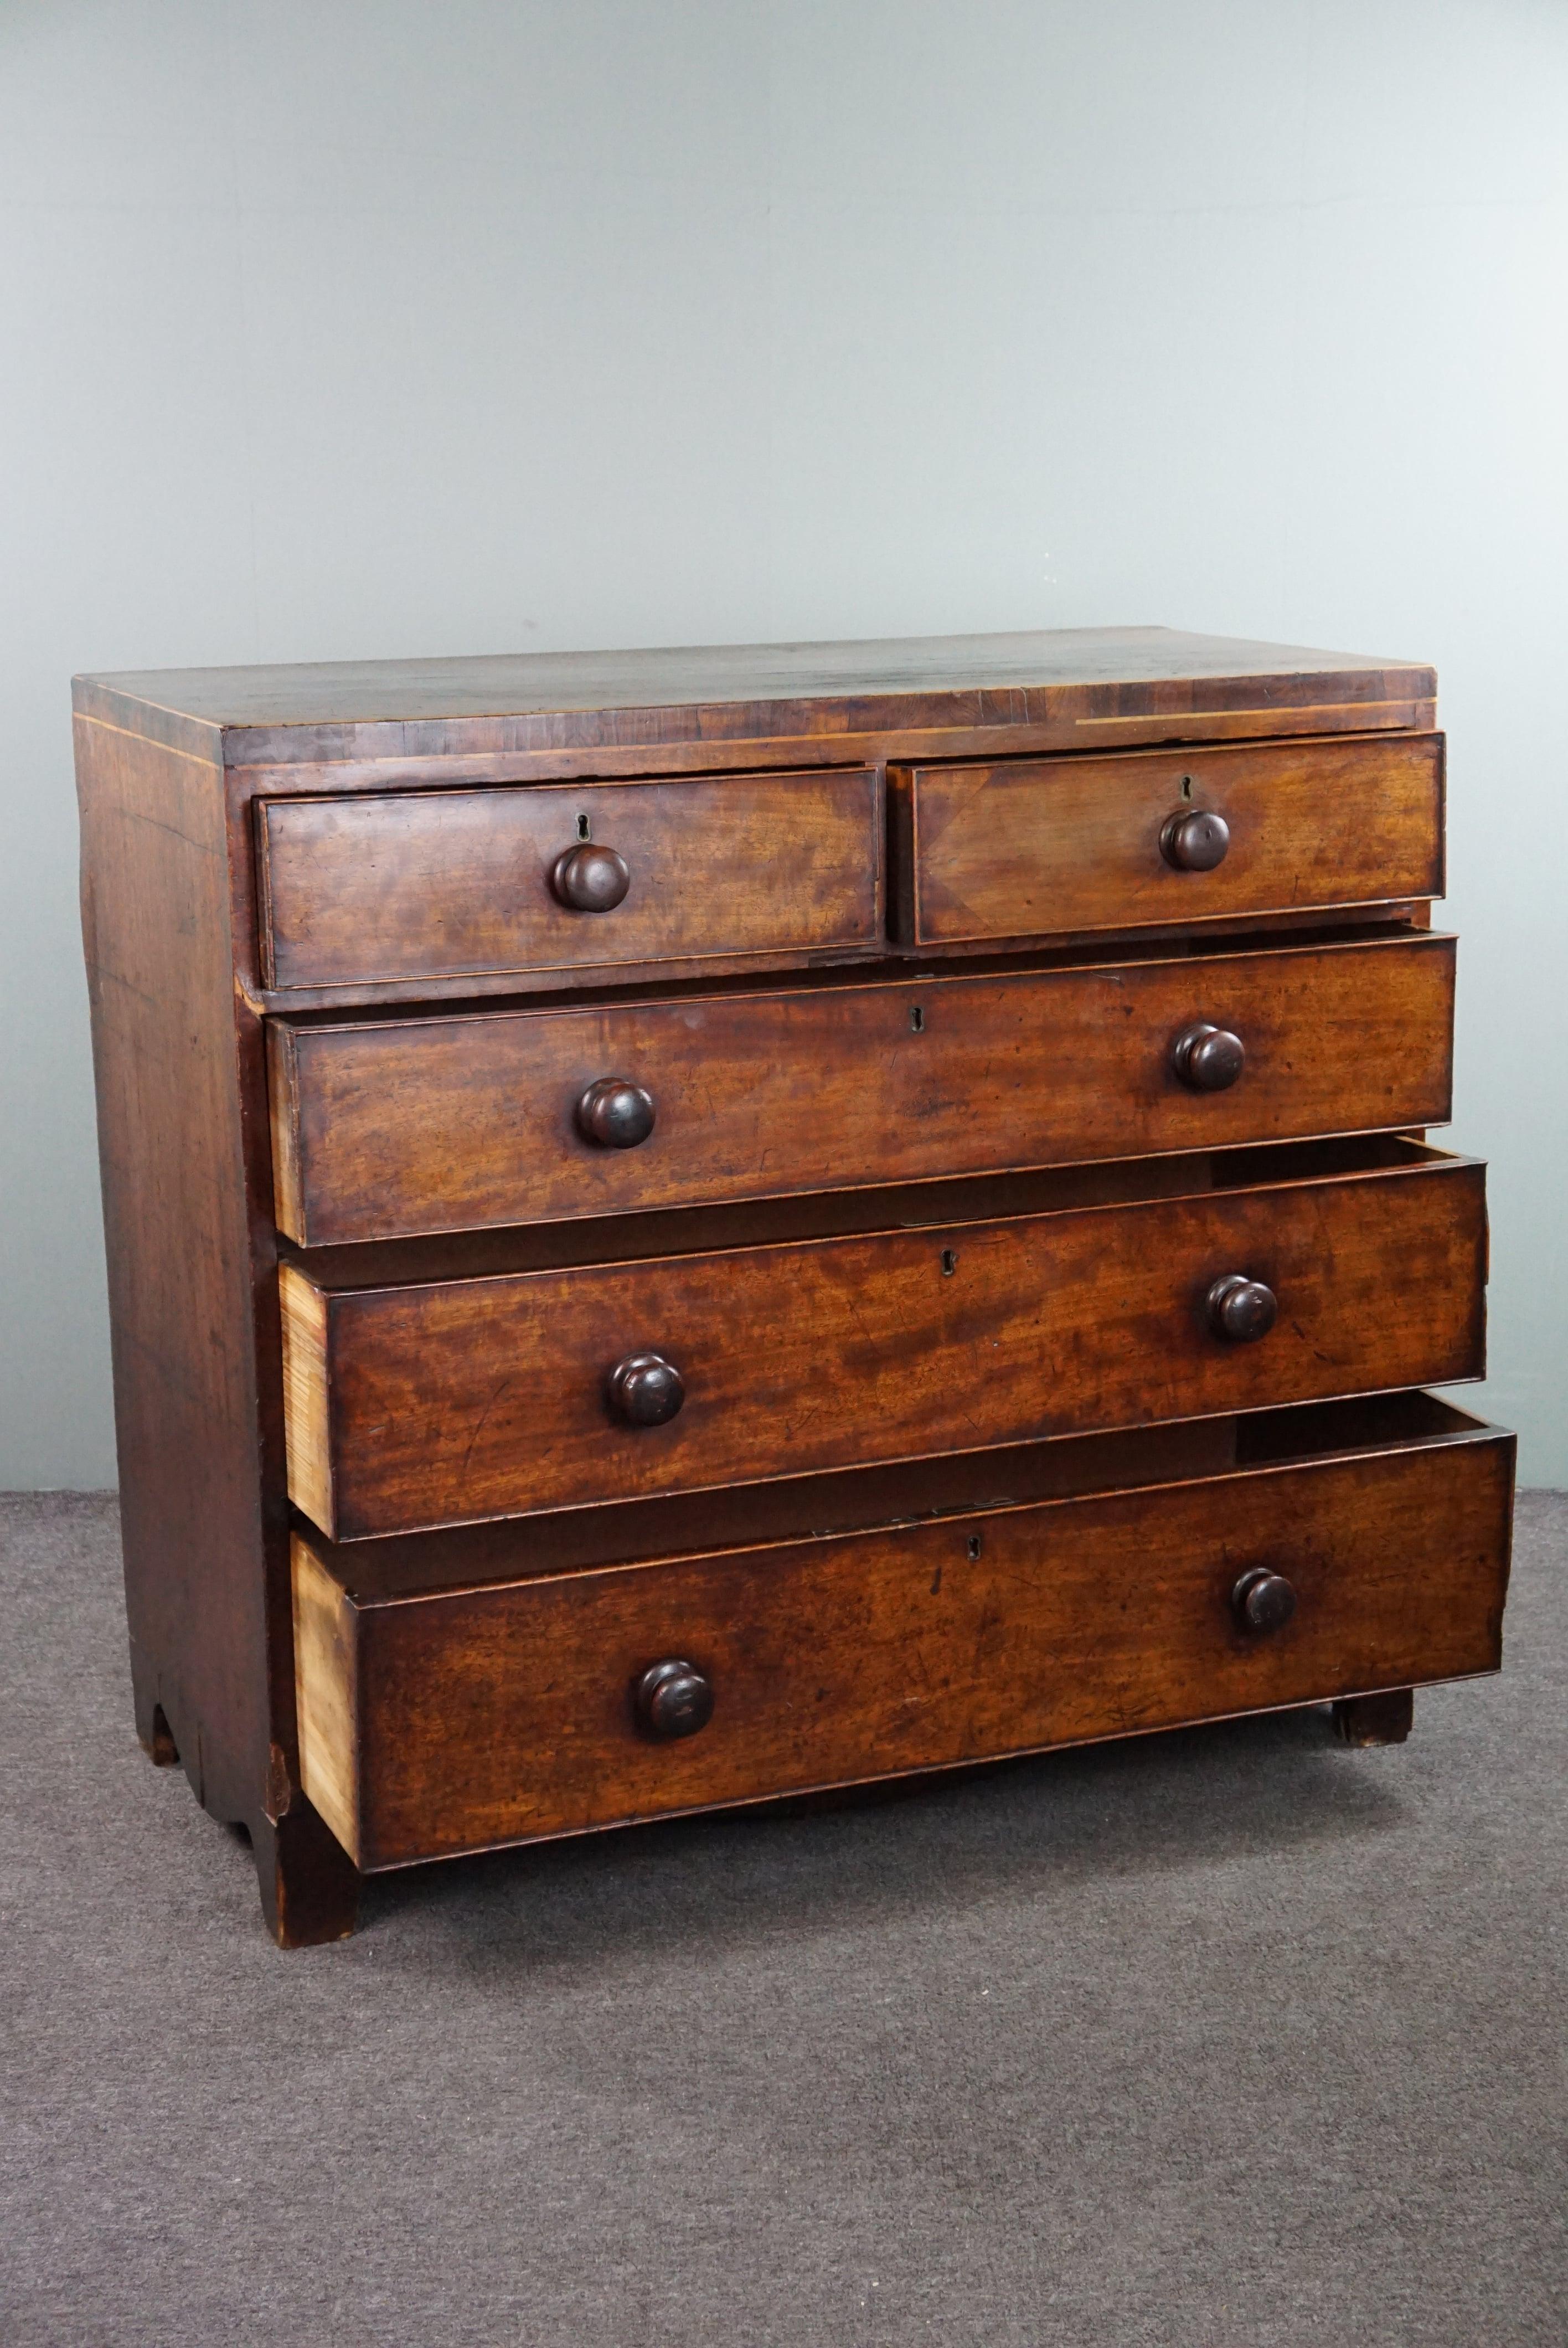 Offered is this robust antique English mahogany chest of drawers with 5 drawers from the mid-19th century, boasting a beautiful patina. 

We believe that every warm and cozy interior needs a beautiful antique chest of drawers. Not only for storing